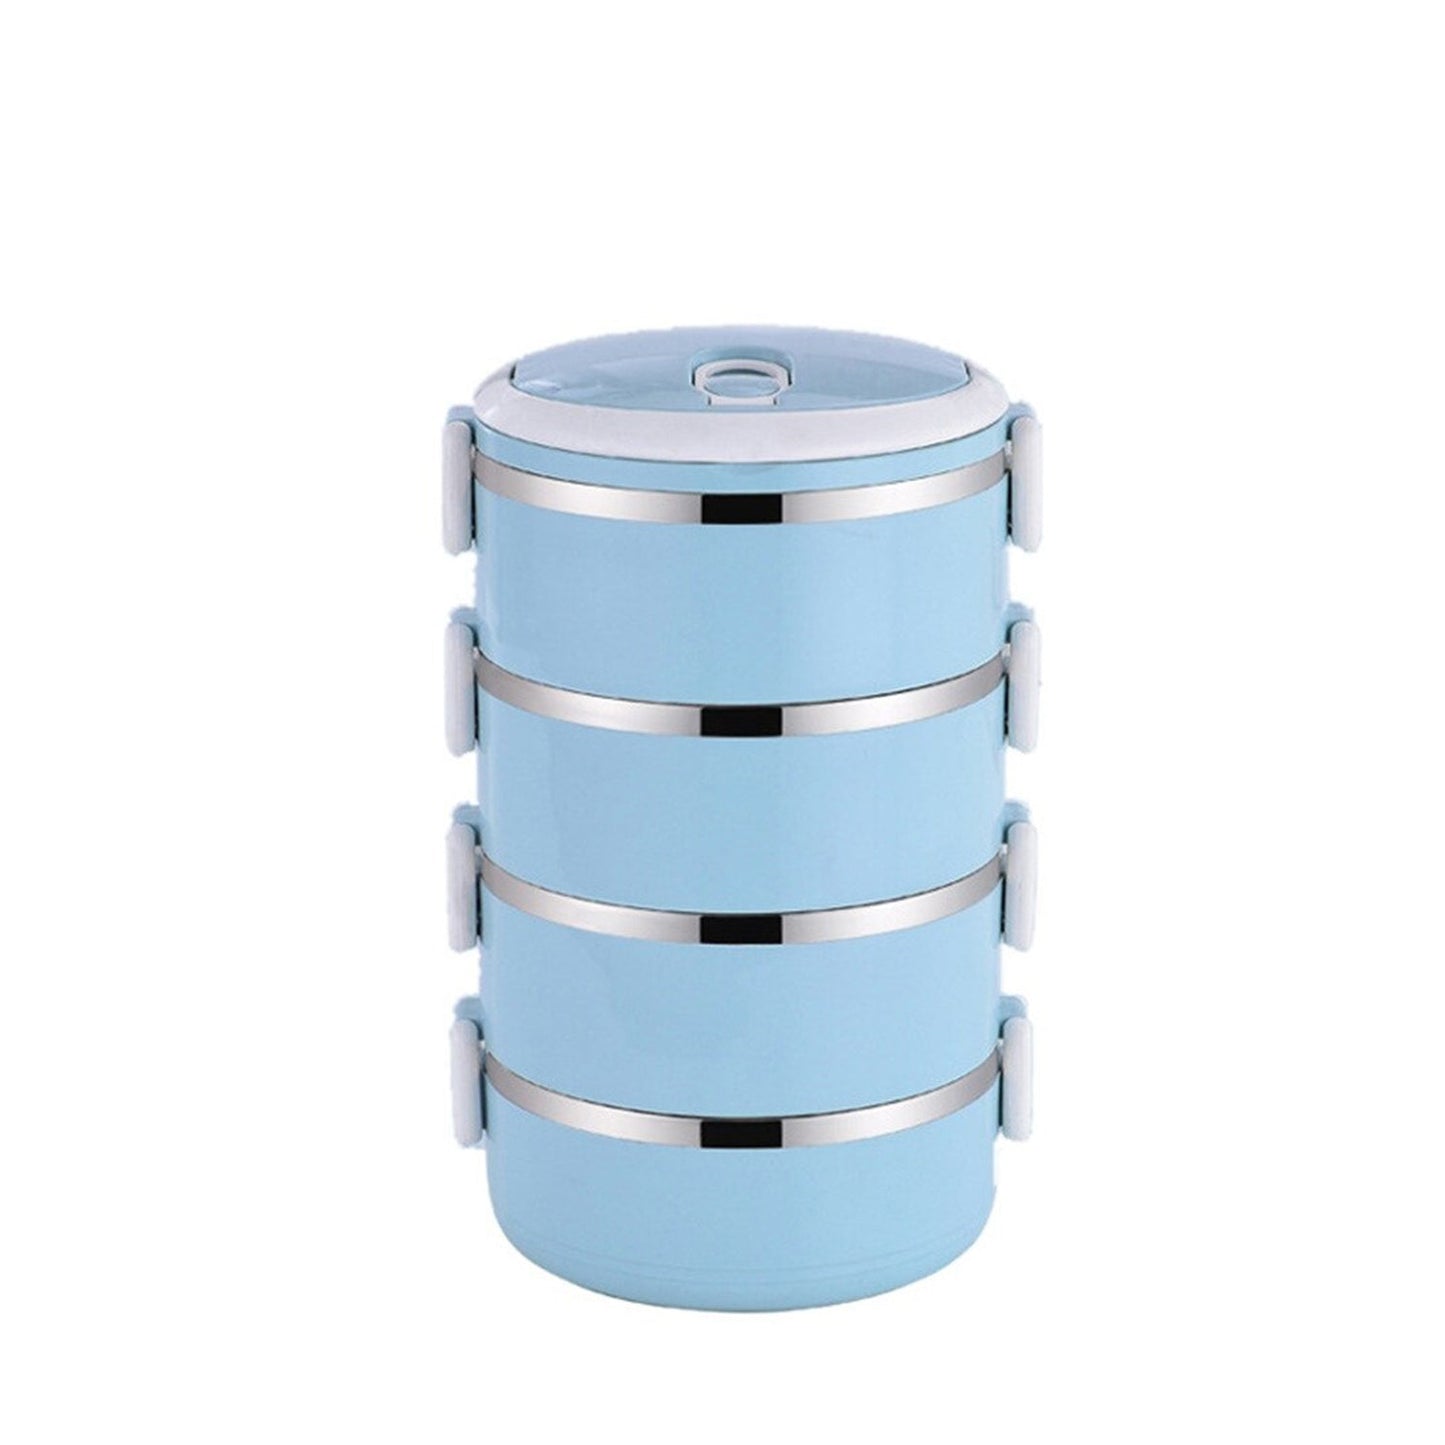 Multi Layer Stainless Steel Hot Lunch Box (4 Layer)